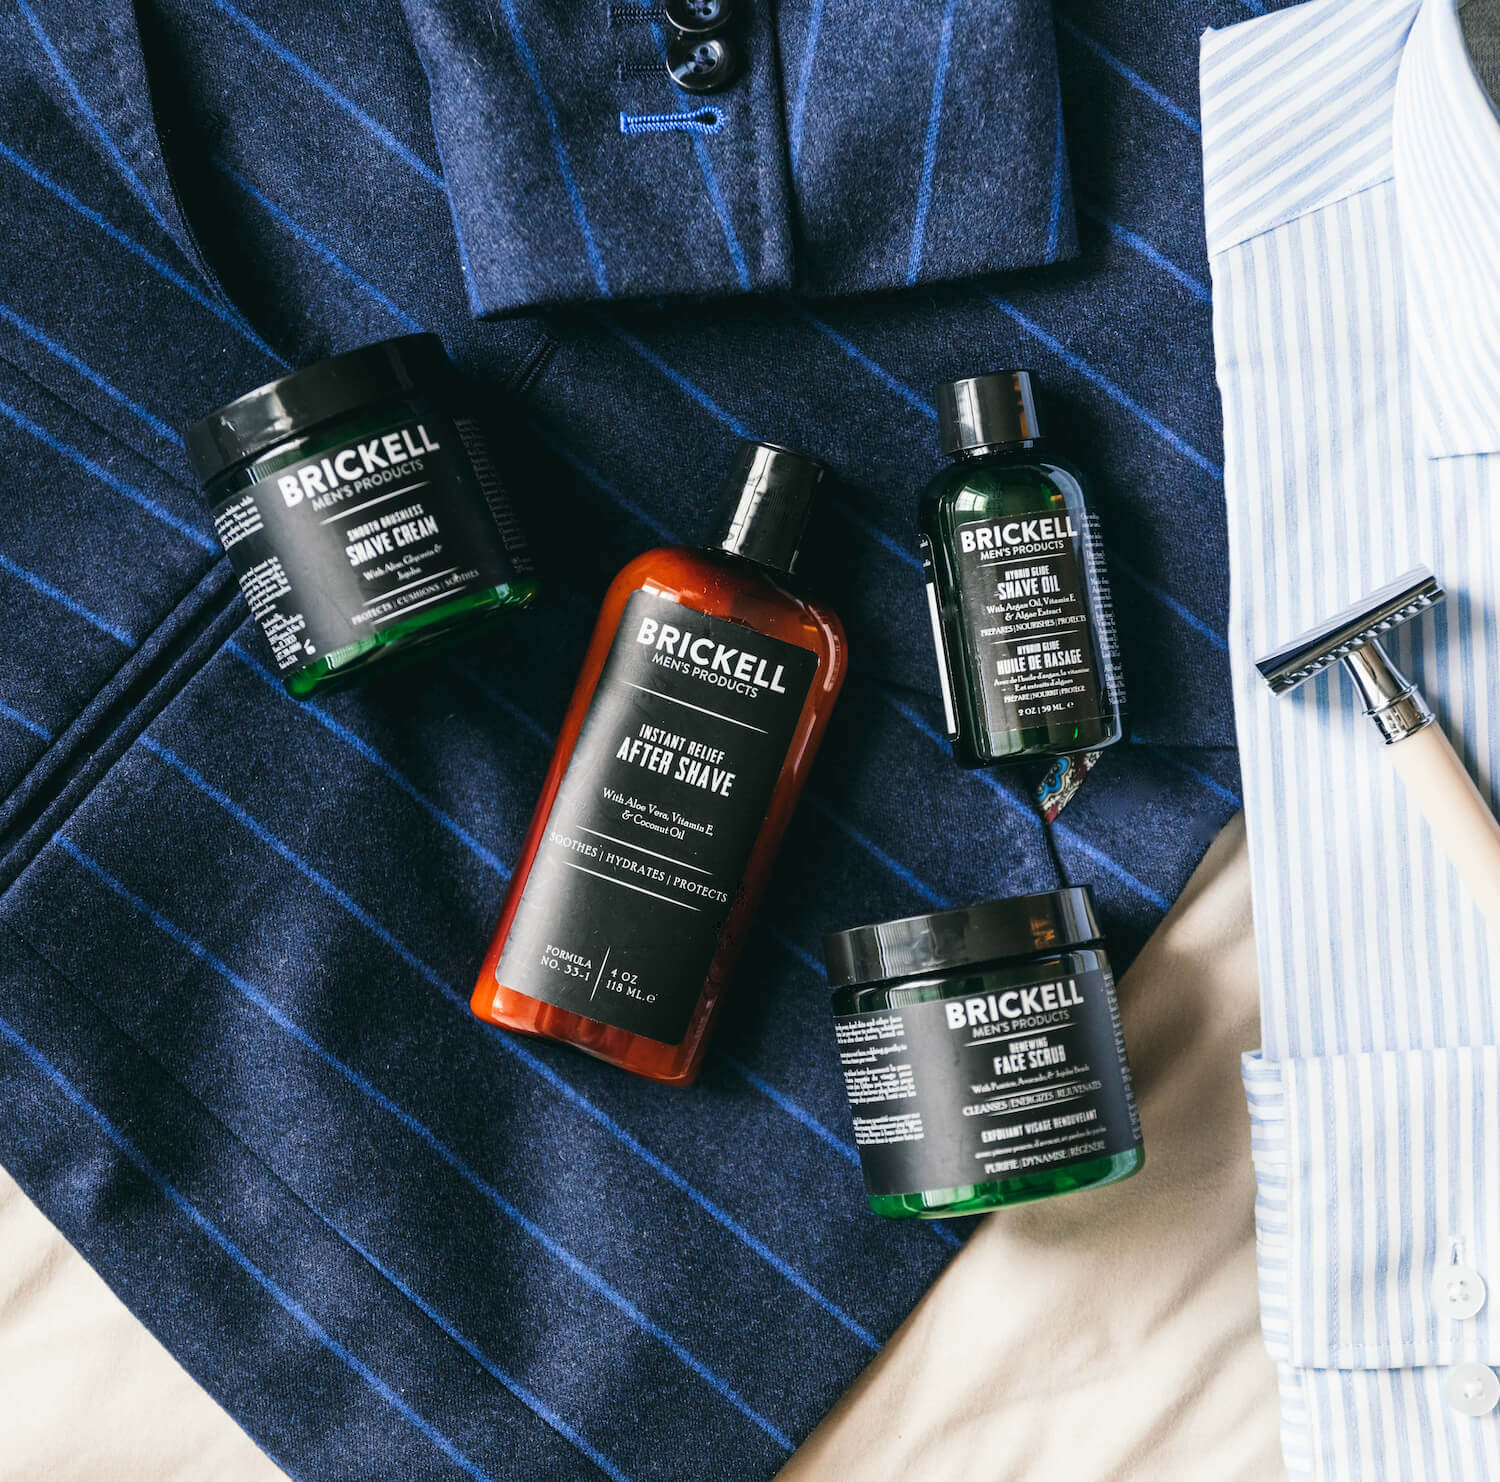 Face Scrub, Shave Oil, Shave Cream, and Aftershave